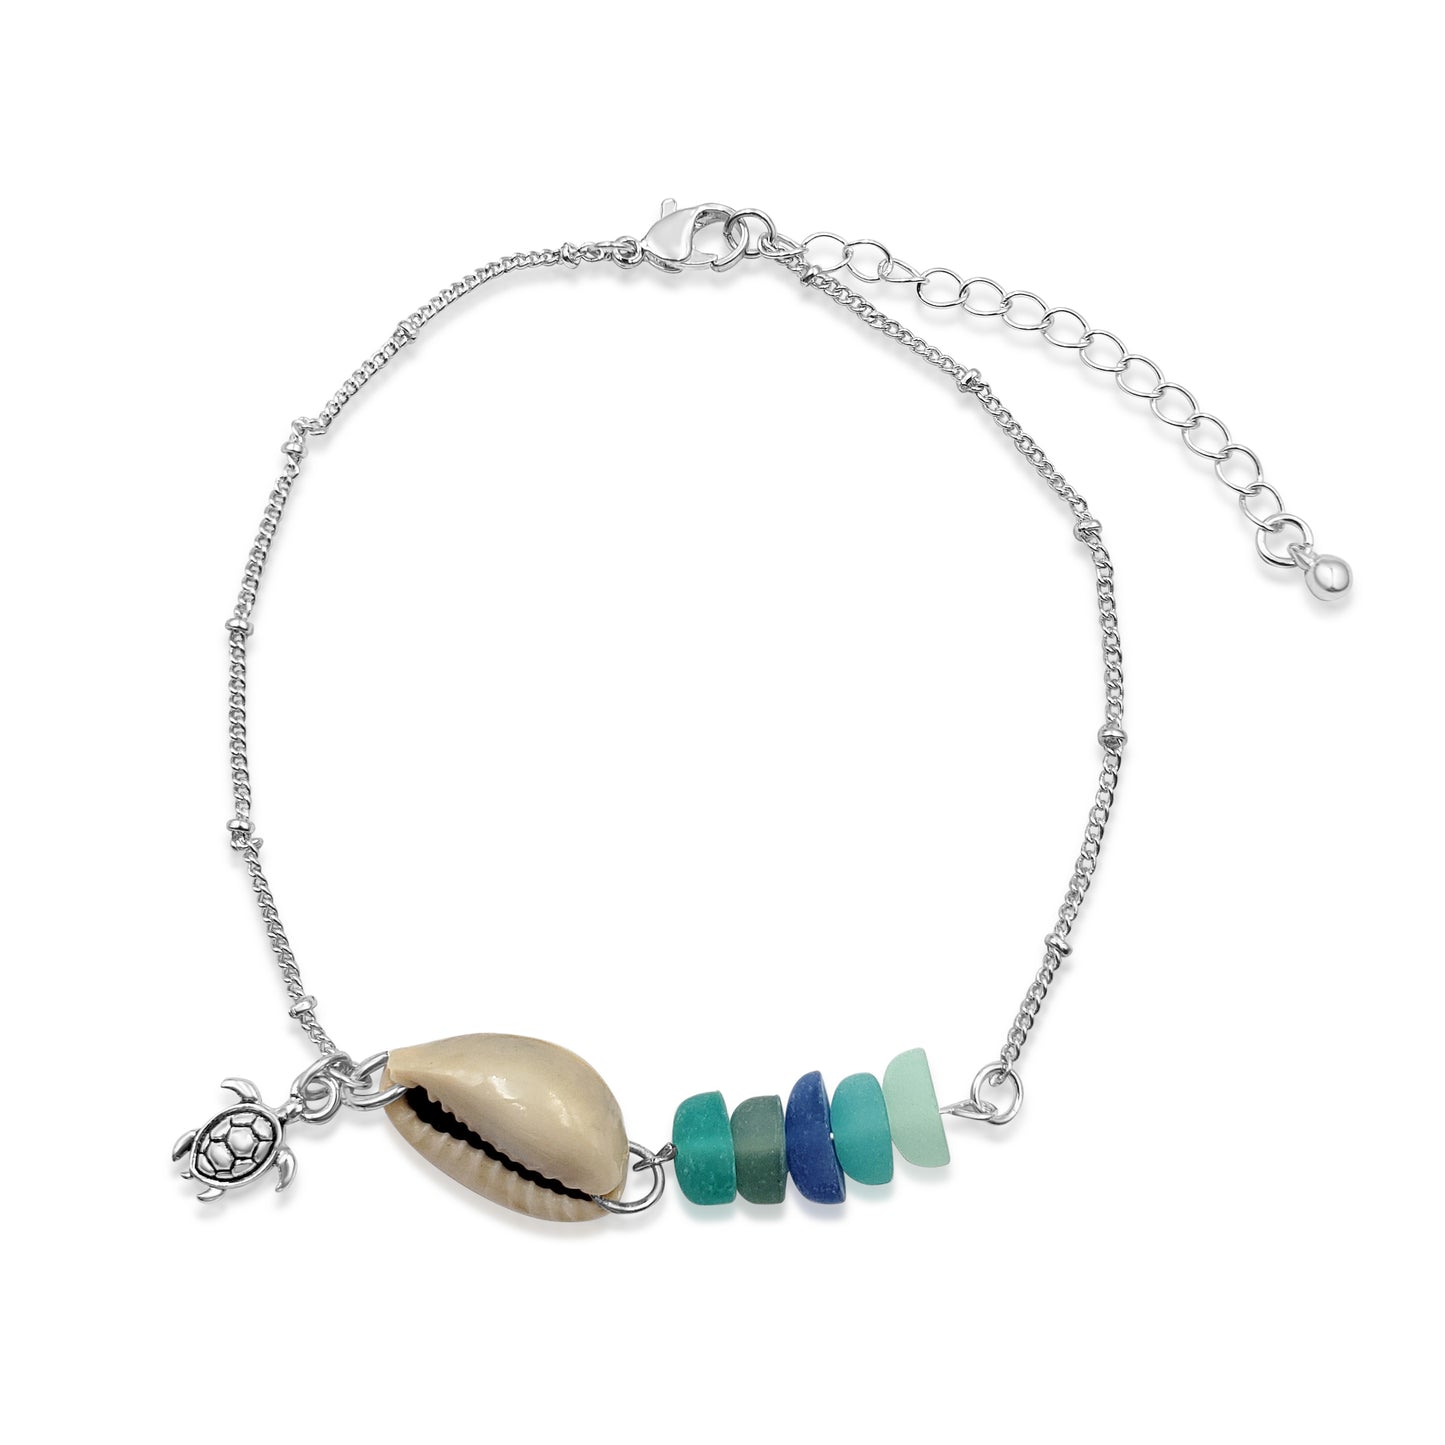 BESHEEK Seaglass BLUE Starfish and Cowrie Shell Artisan Silvertone Anklet with Extension | Handmade Hypoallergenic Beach Gala Wedding Style Jewelry